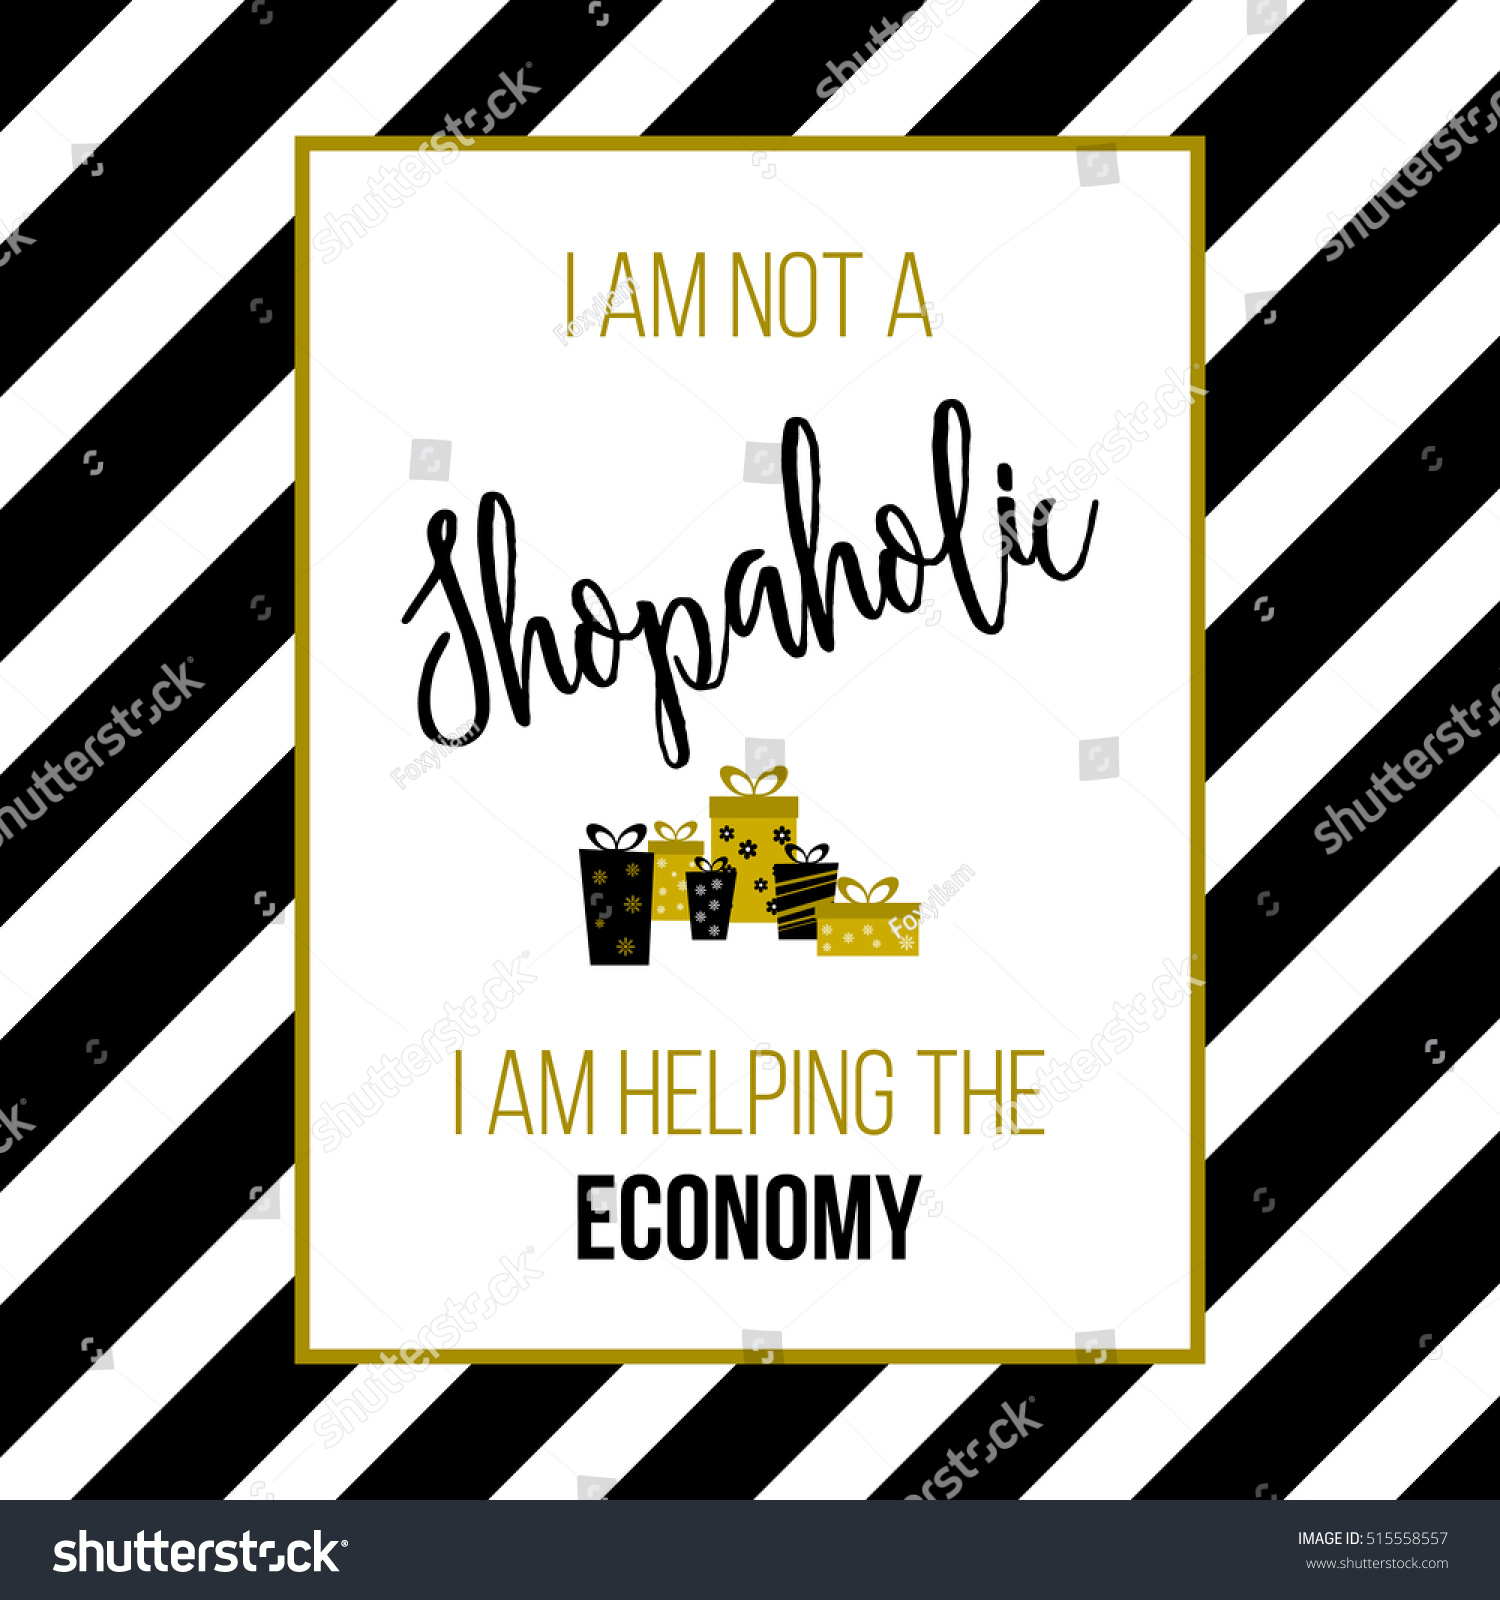 Not Shopaholic Helping Economy Shopping Quote Stock Vector Royalty Free 515558557